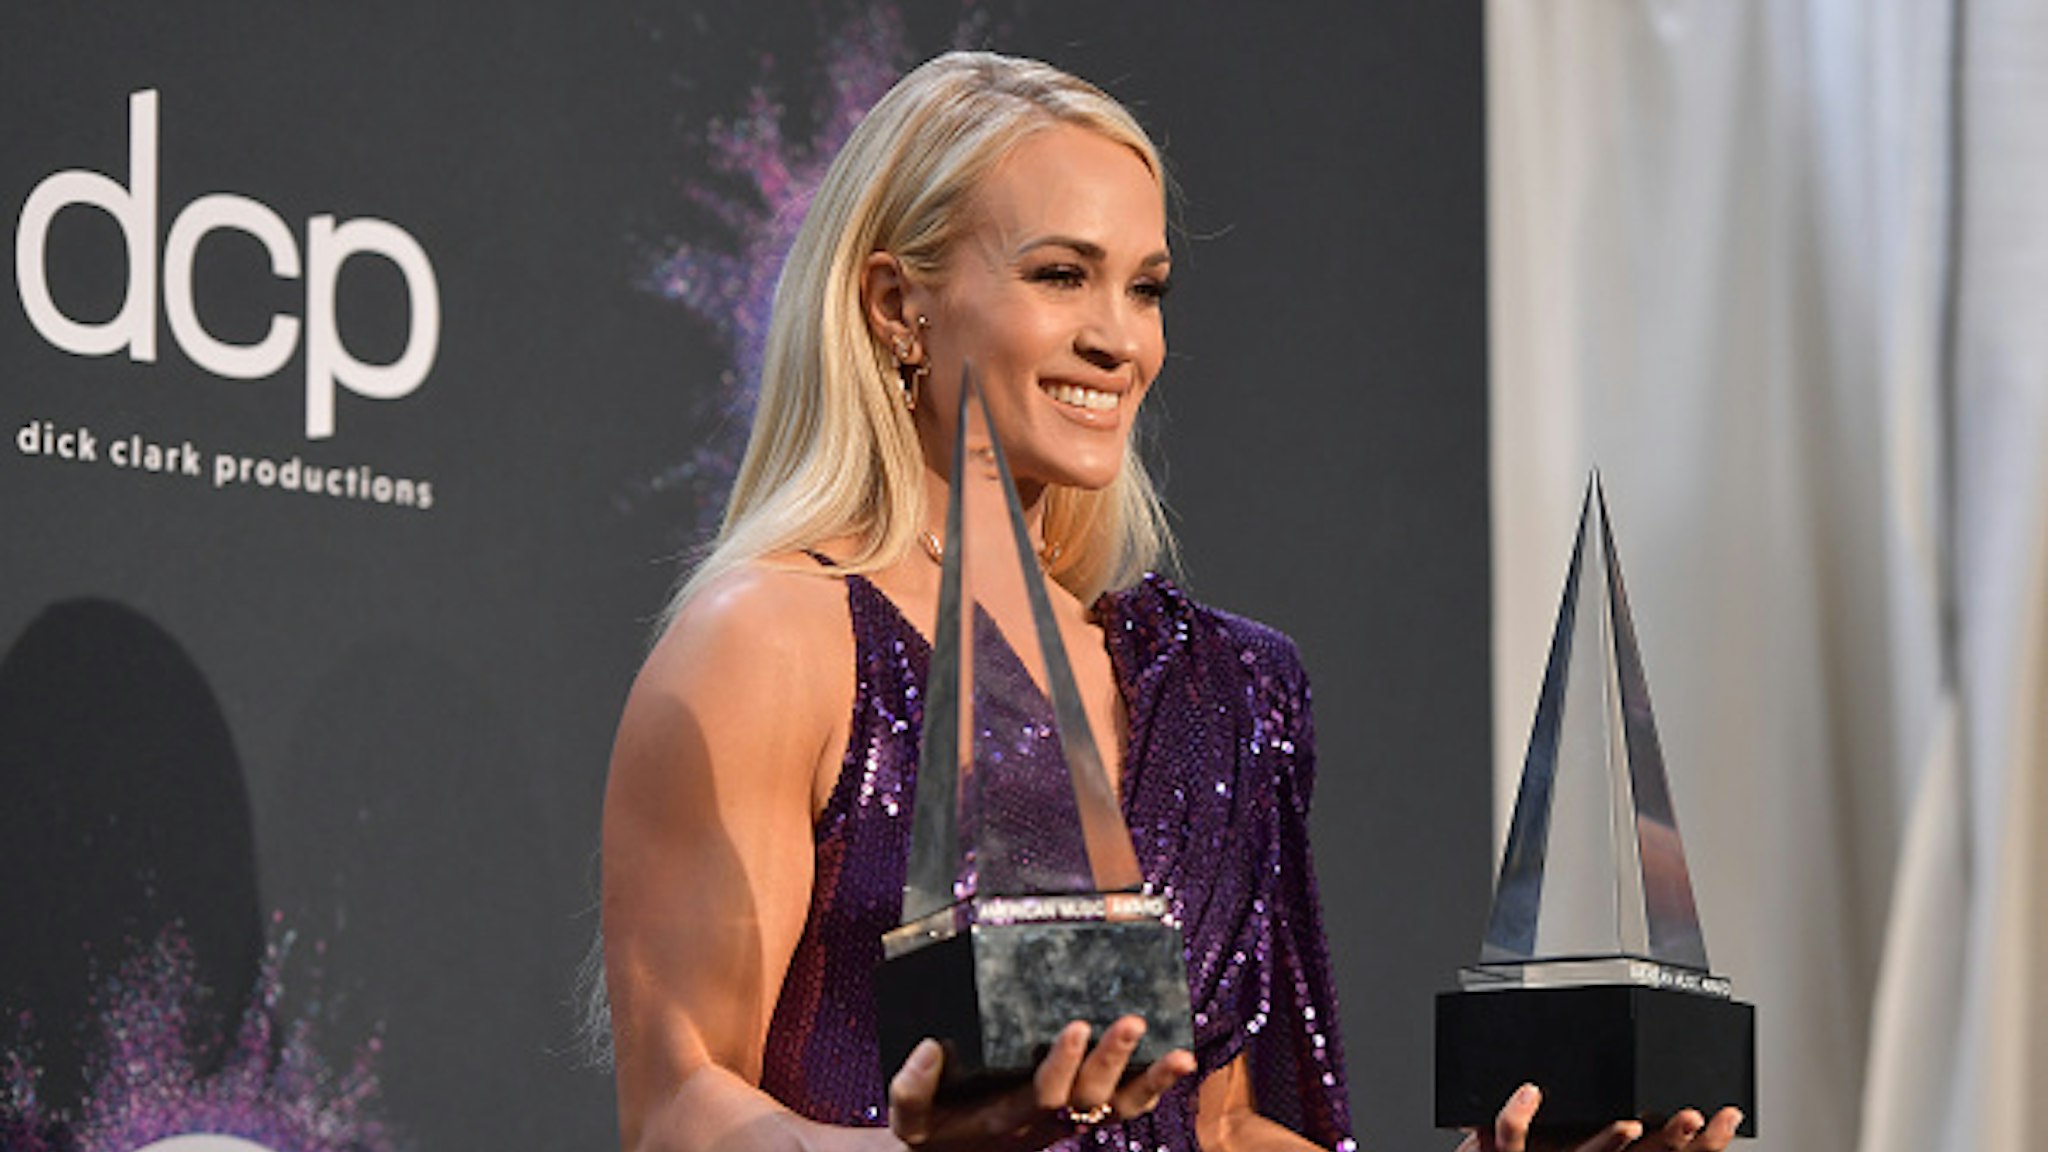 LOS ANGELES, CALIFORNIA - NOVEMBER 24: Carrie Underwood, winner of the Favorite Album - Country award for 'Cry Pretty' and Favorite Female Artist - Country award, poses in the press room during the 2019 American Music Awards at Microsoft Theater on November 24, 2019 in Los Angeles, California